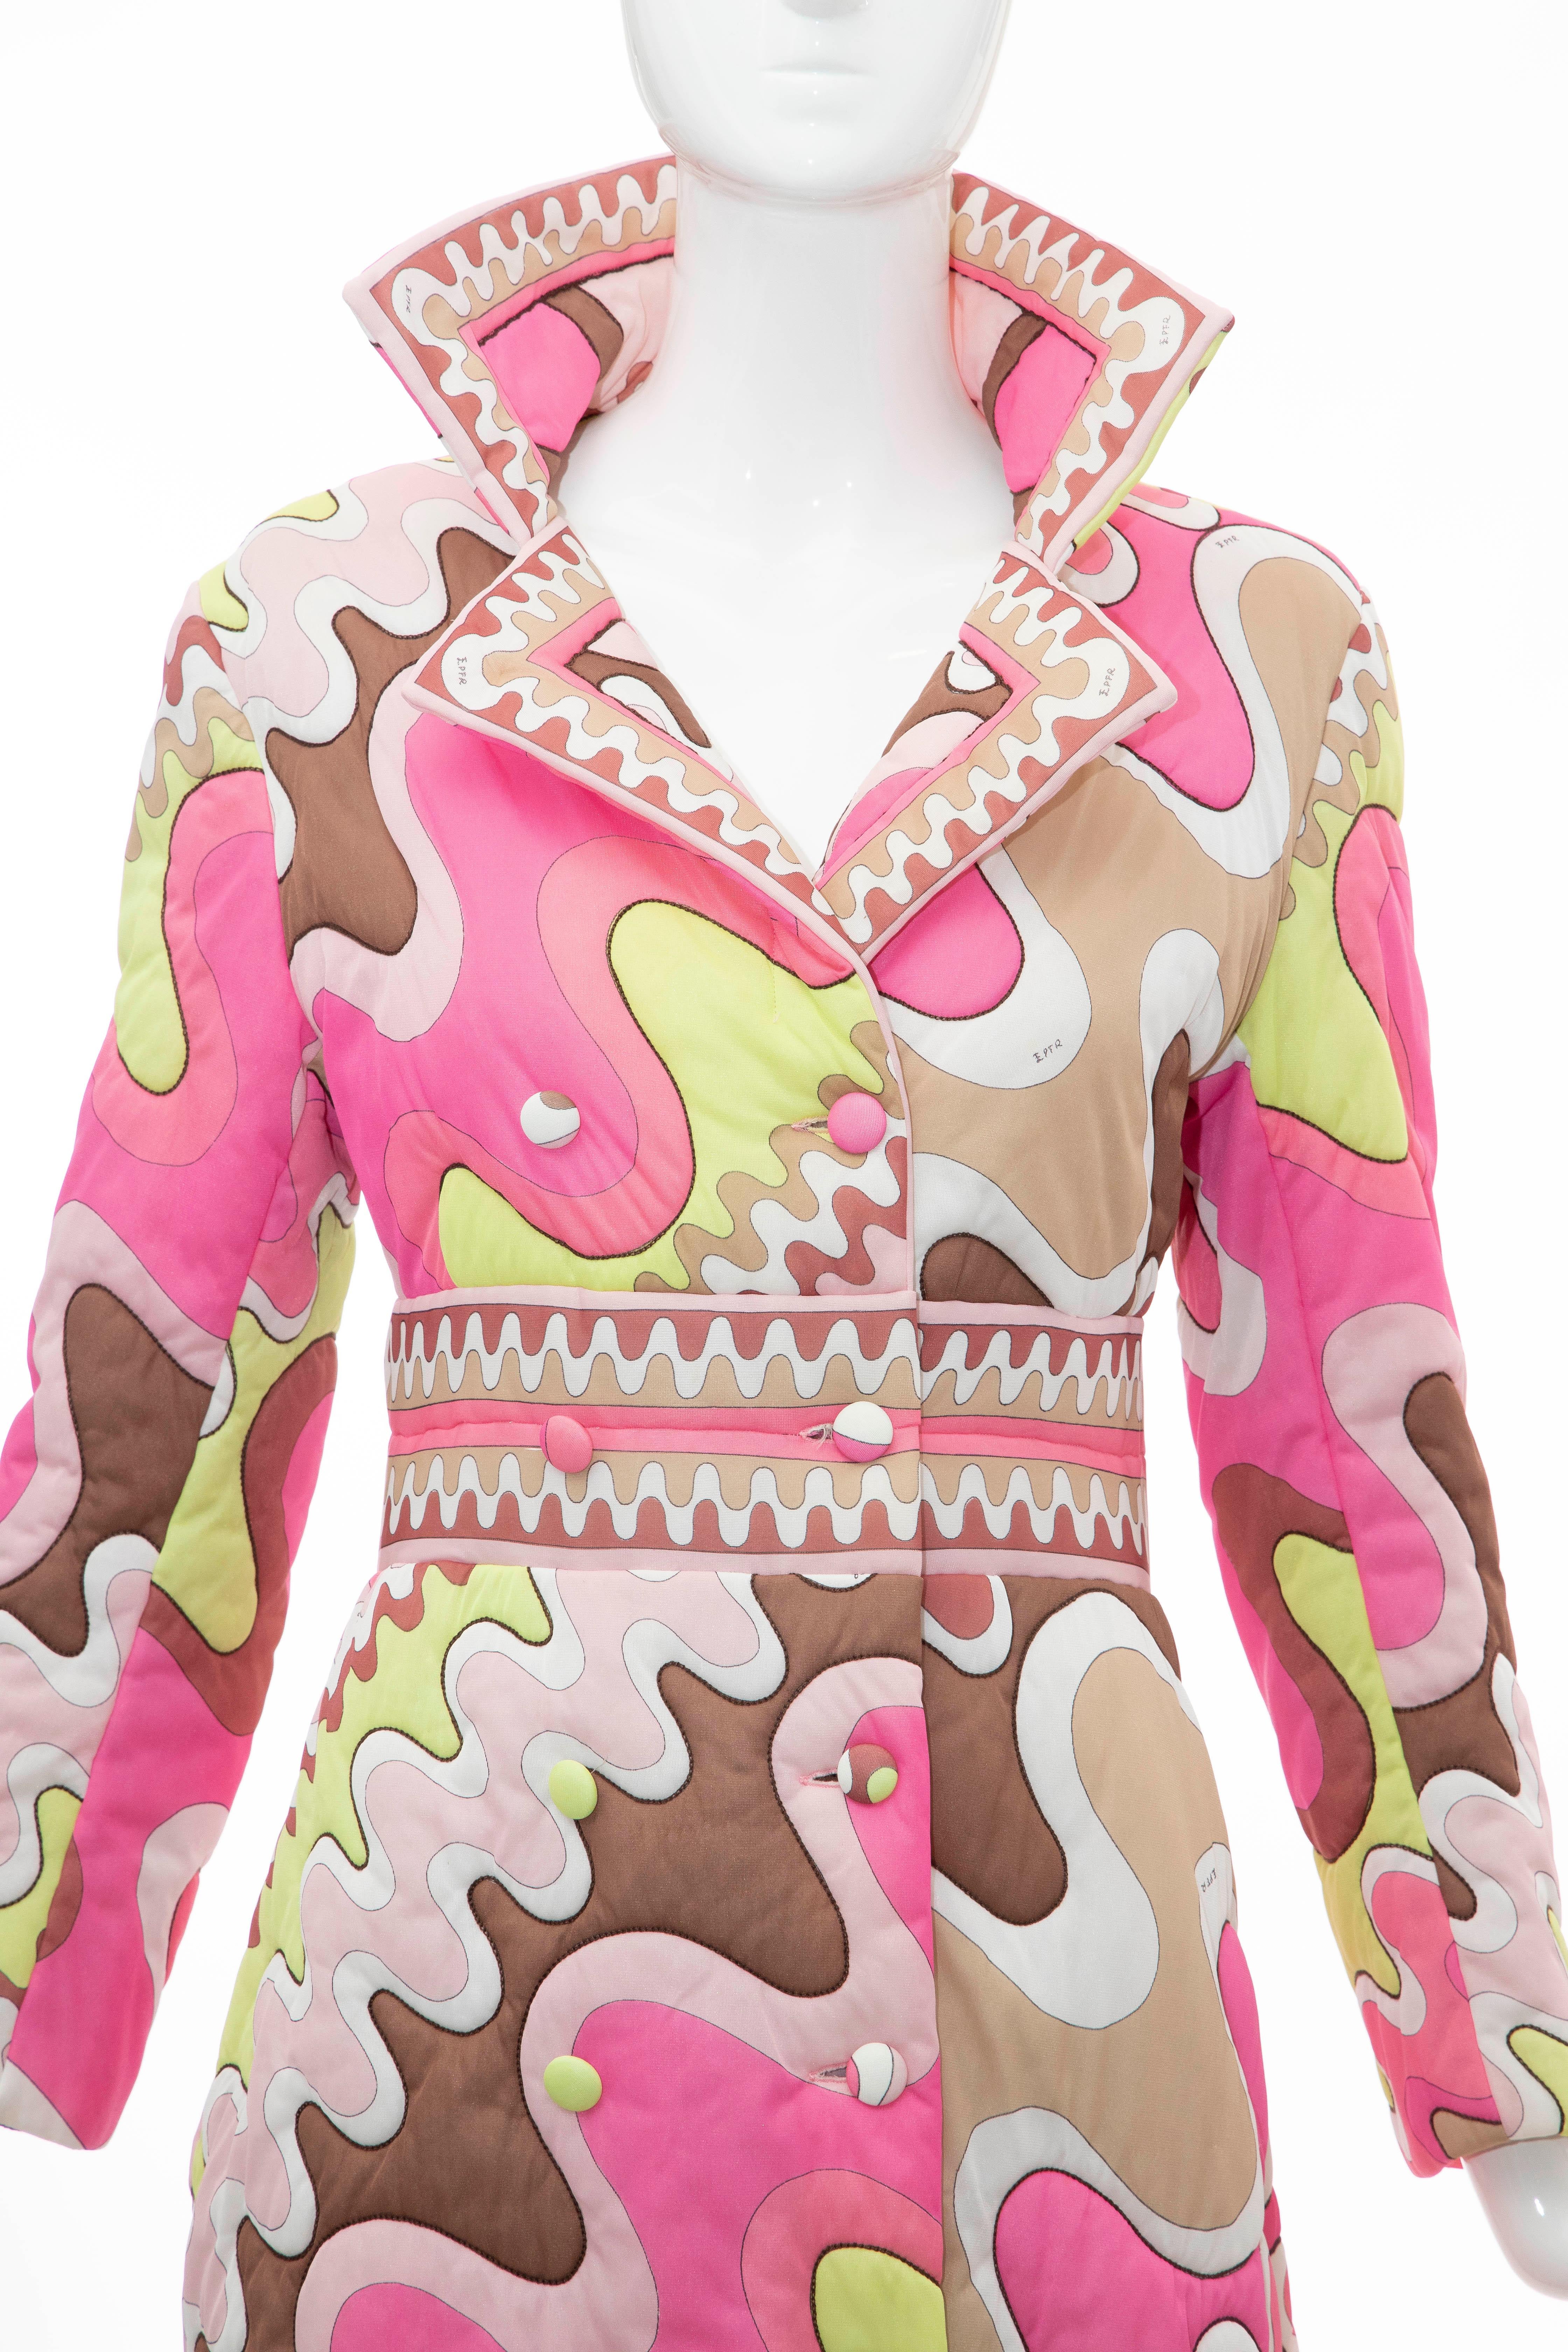 Brown Emilio Pucci Double-Breasted Abstract Print Quilted Coat, Circa: 1970's